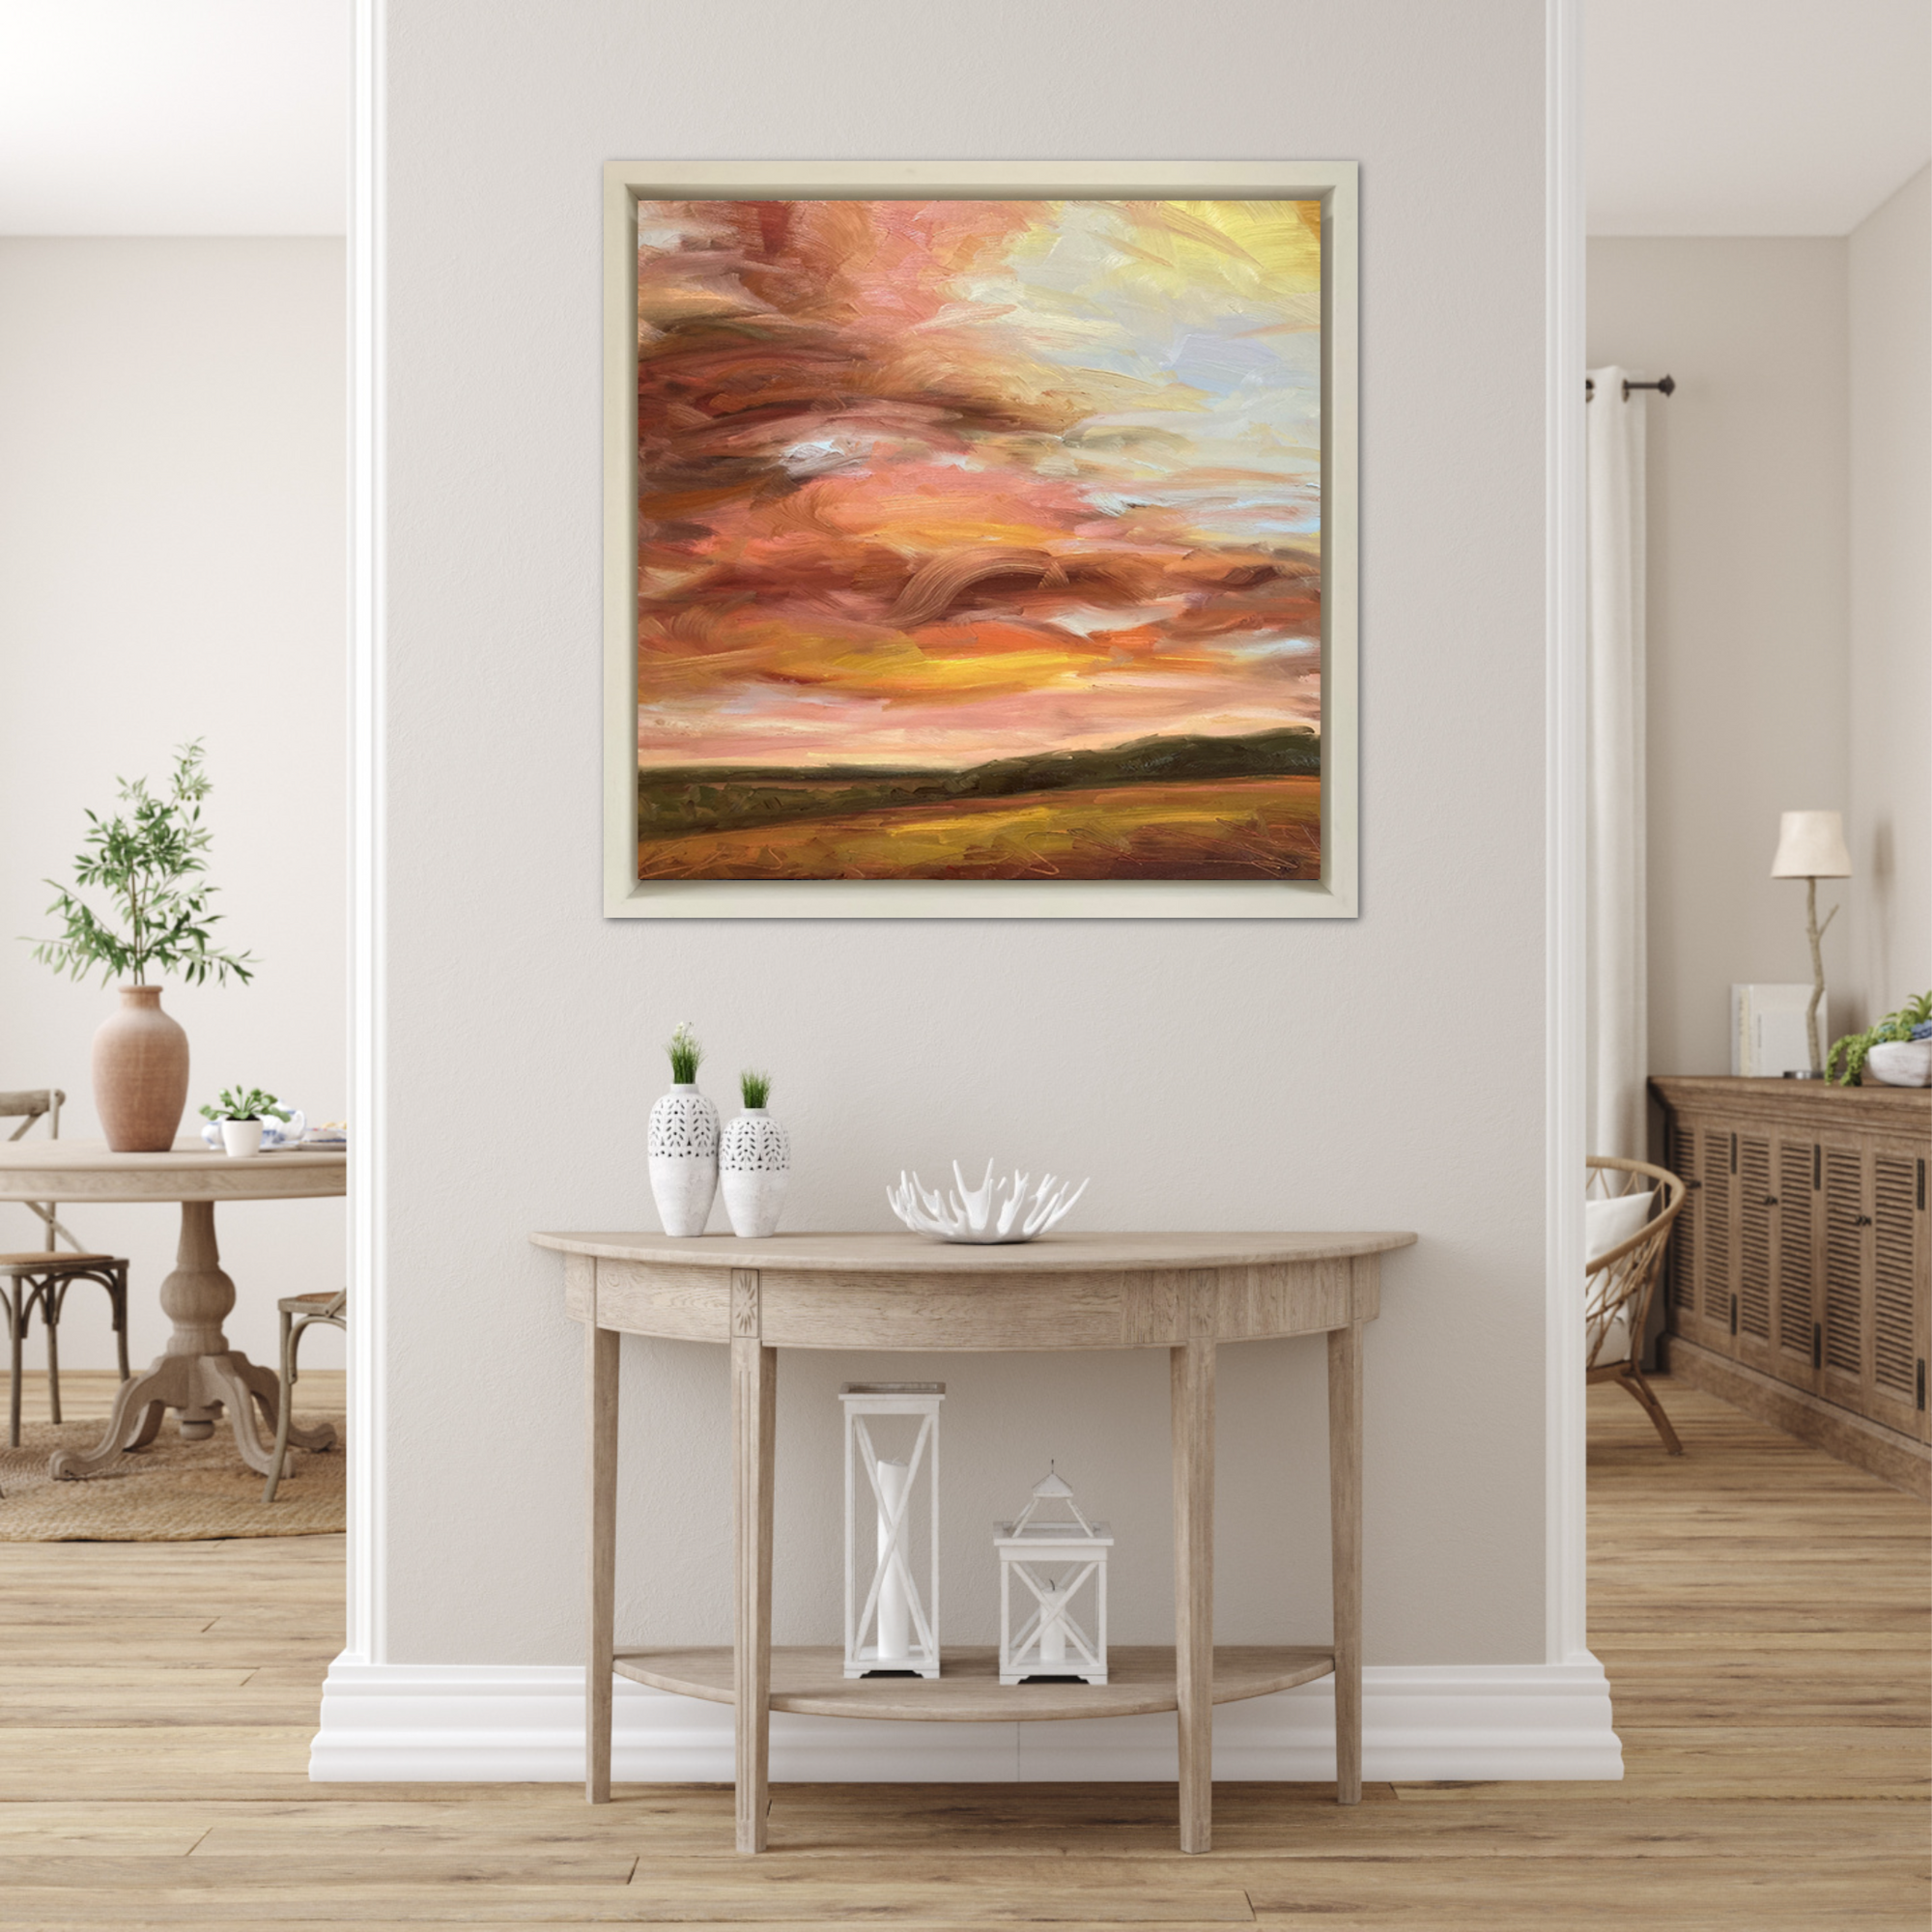 Glowing Original Oil Landscape Painting In Room Setting1